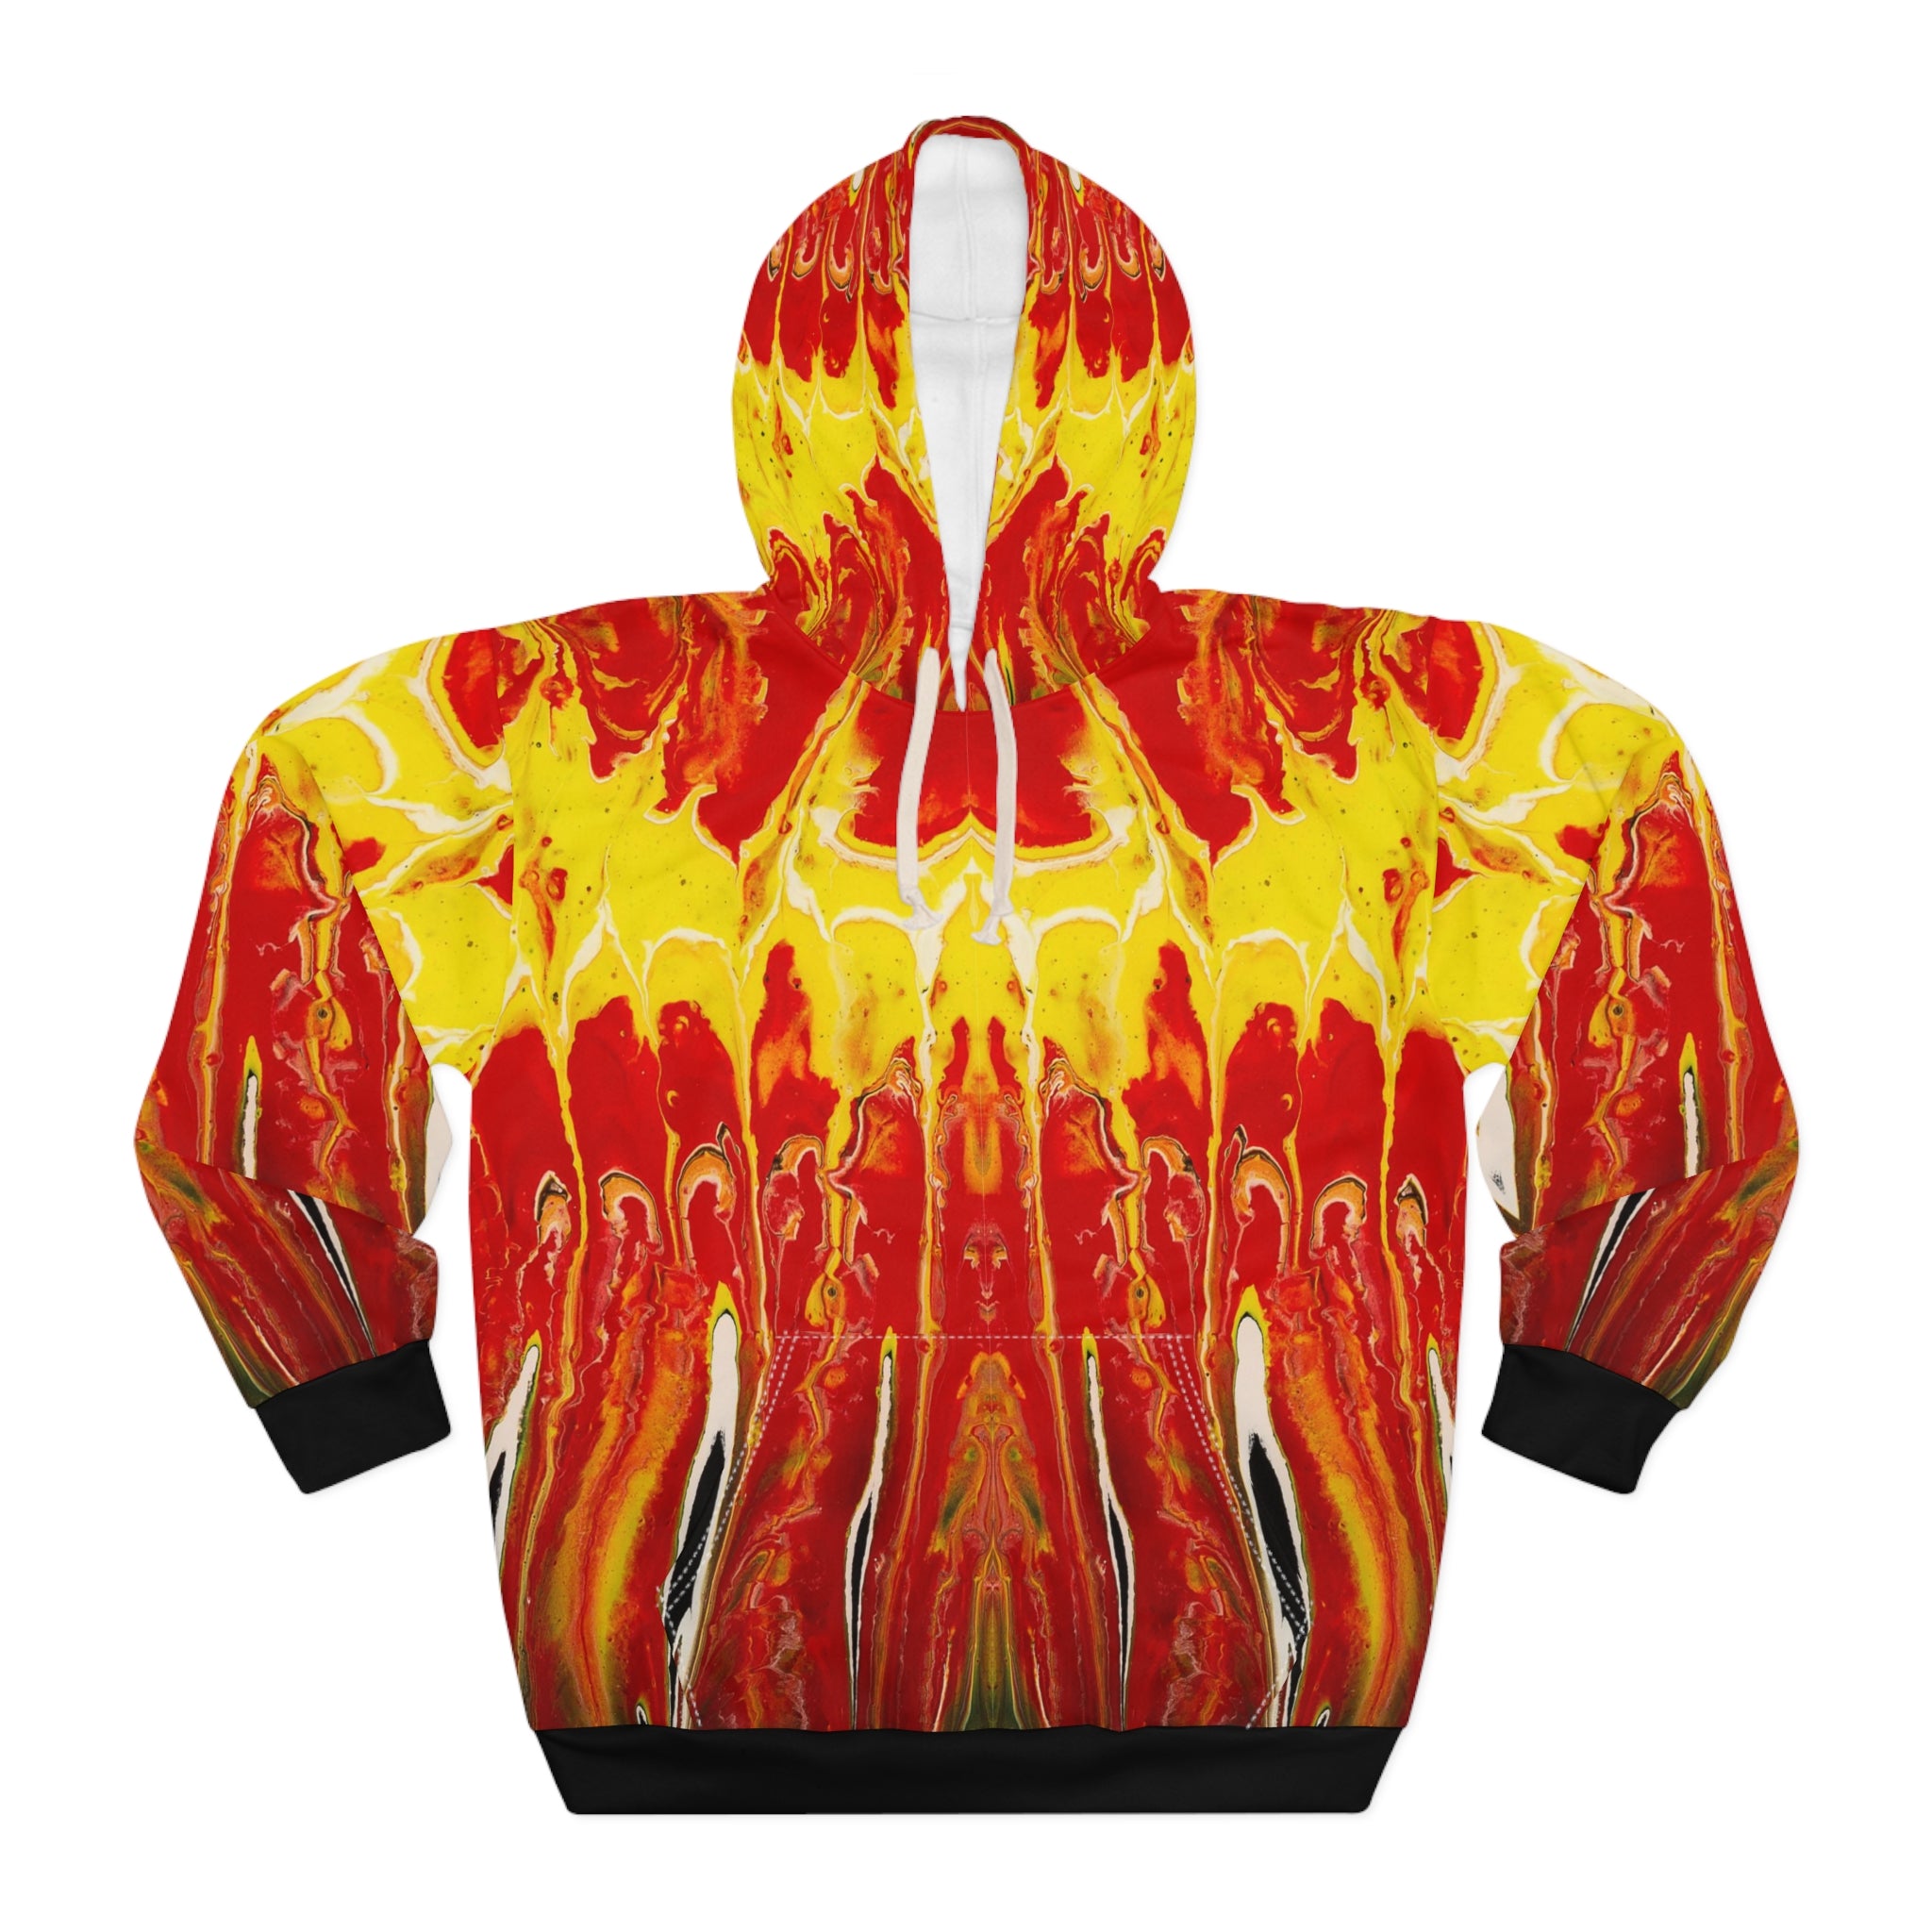 Cameron Creations - Internal Flames - Pullover Hoodie - Front